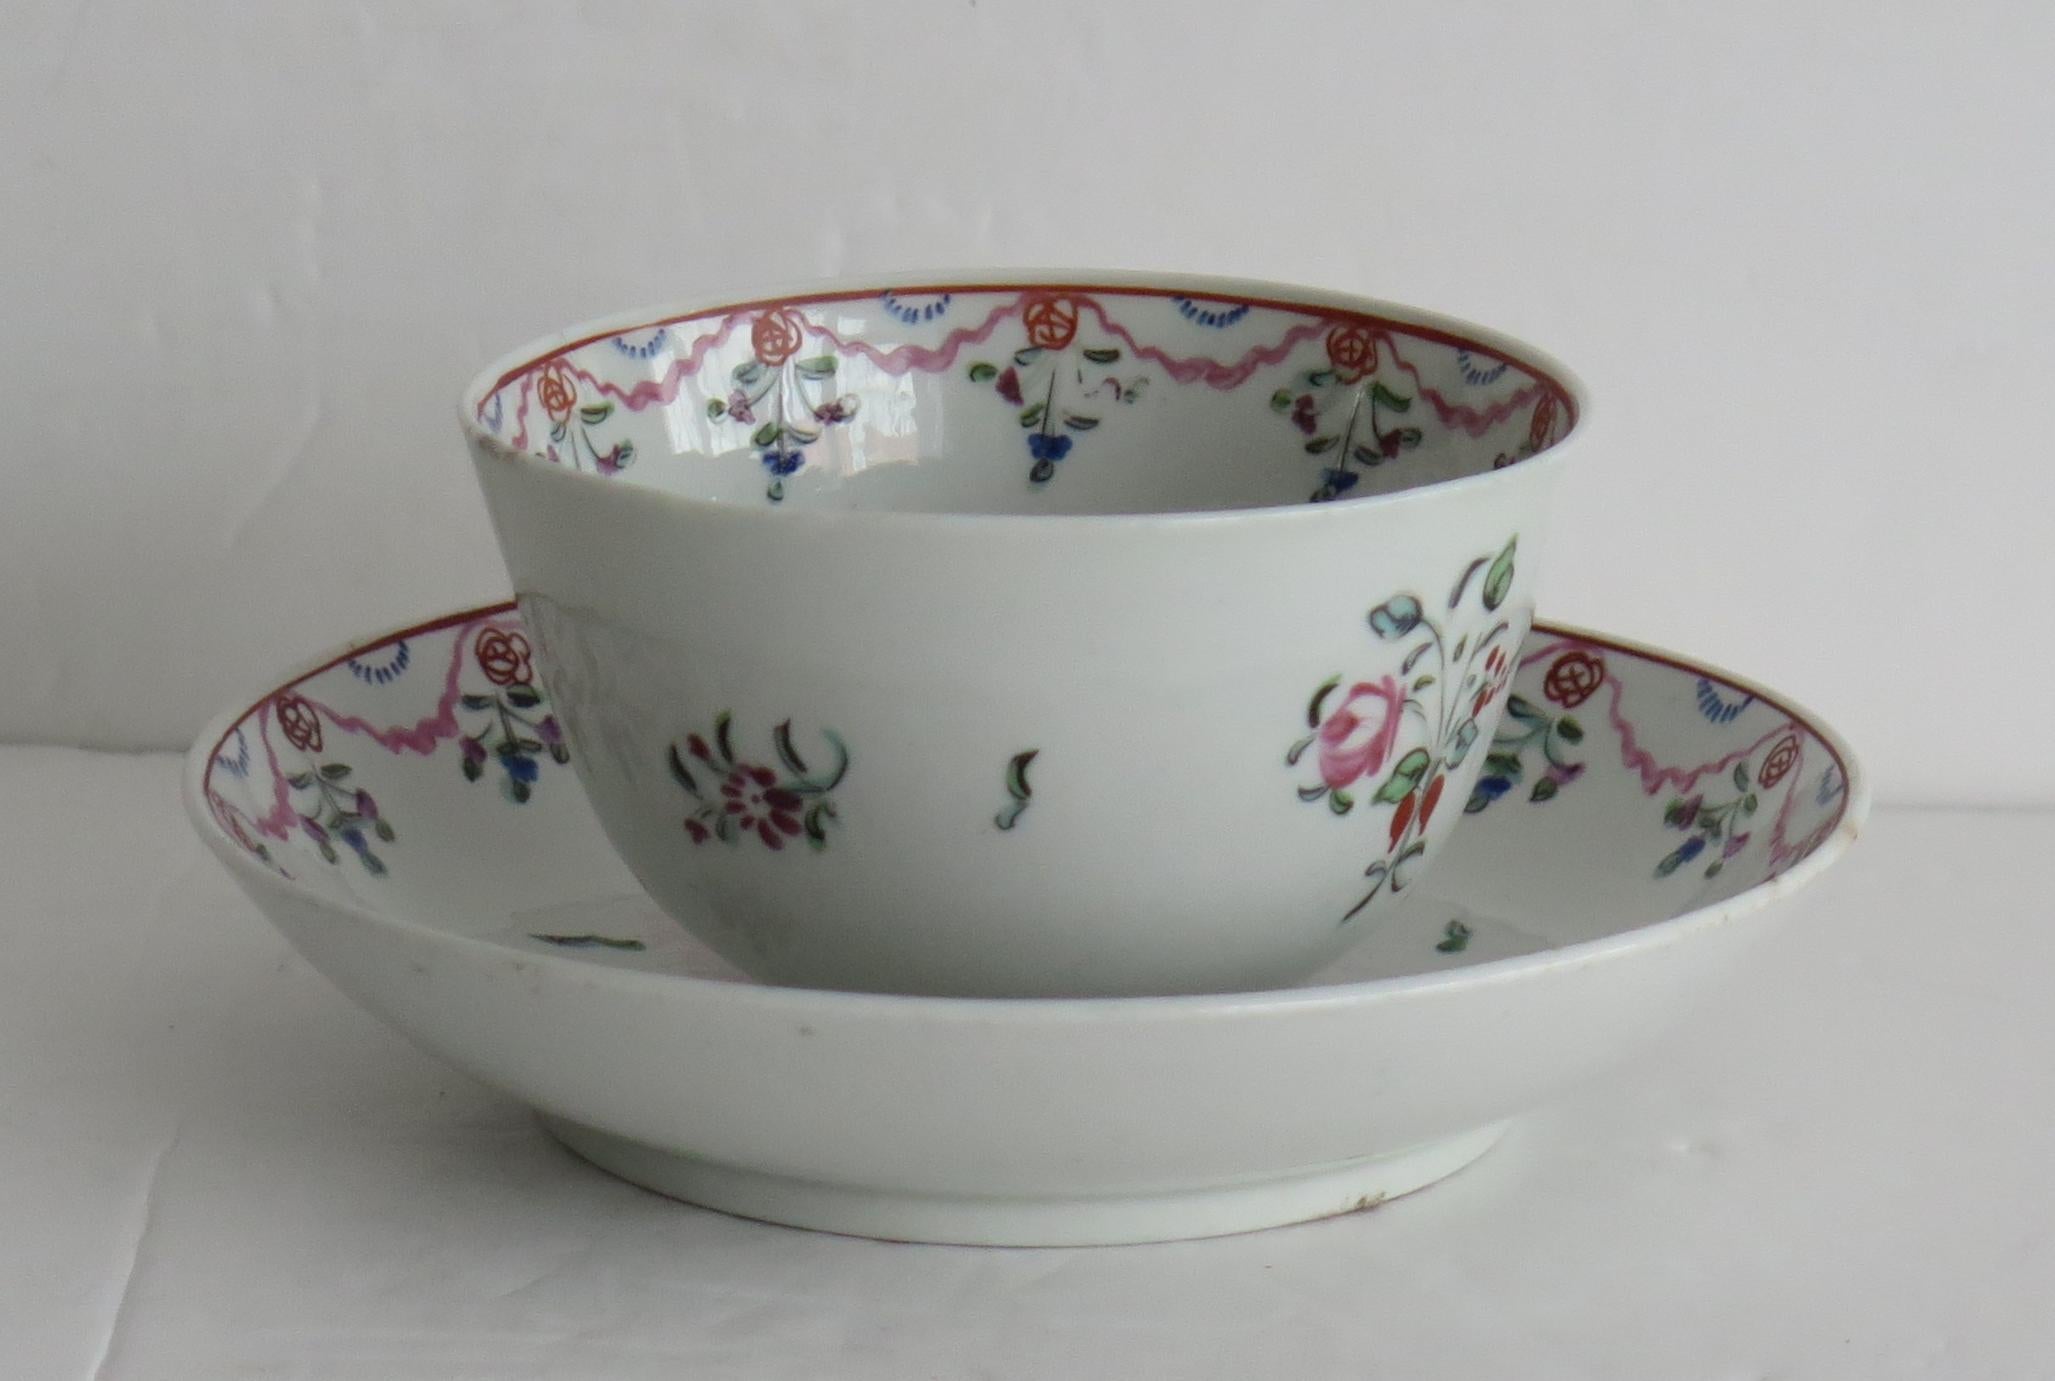 This is a hard paste porcelain Tea Bowl and Saucer by New Hall, dating to the turn of the 18th century, George 111rd period, circa 1800.

Both pieces are decorated over-glaze with a hand painted French Chantilly pattern, showing a floral